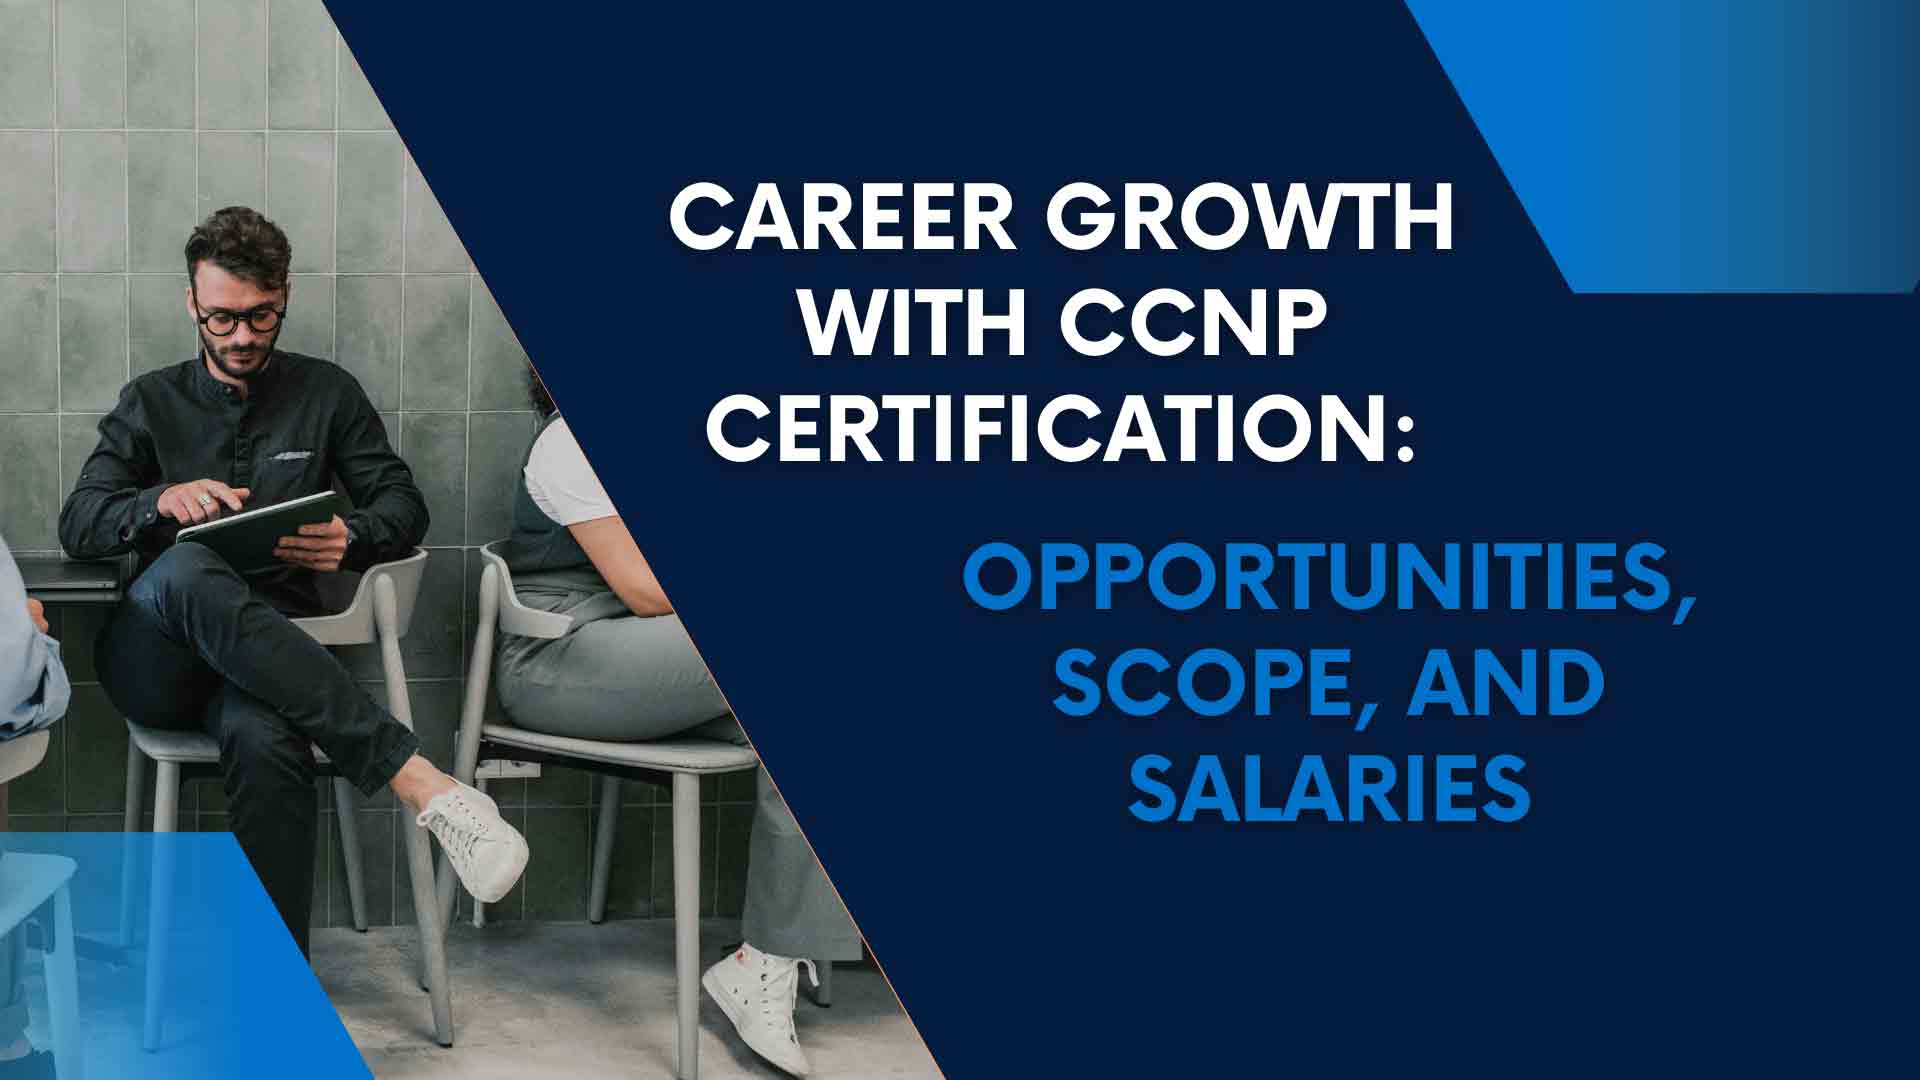 Career Growth with CCNP Certification: Opportunities, Scope, and Salaries